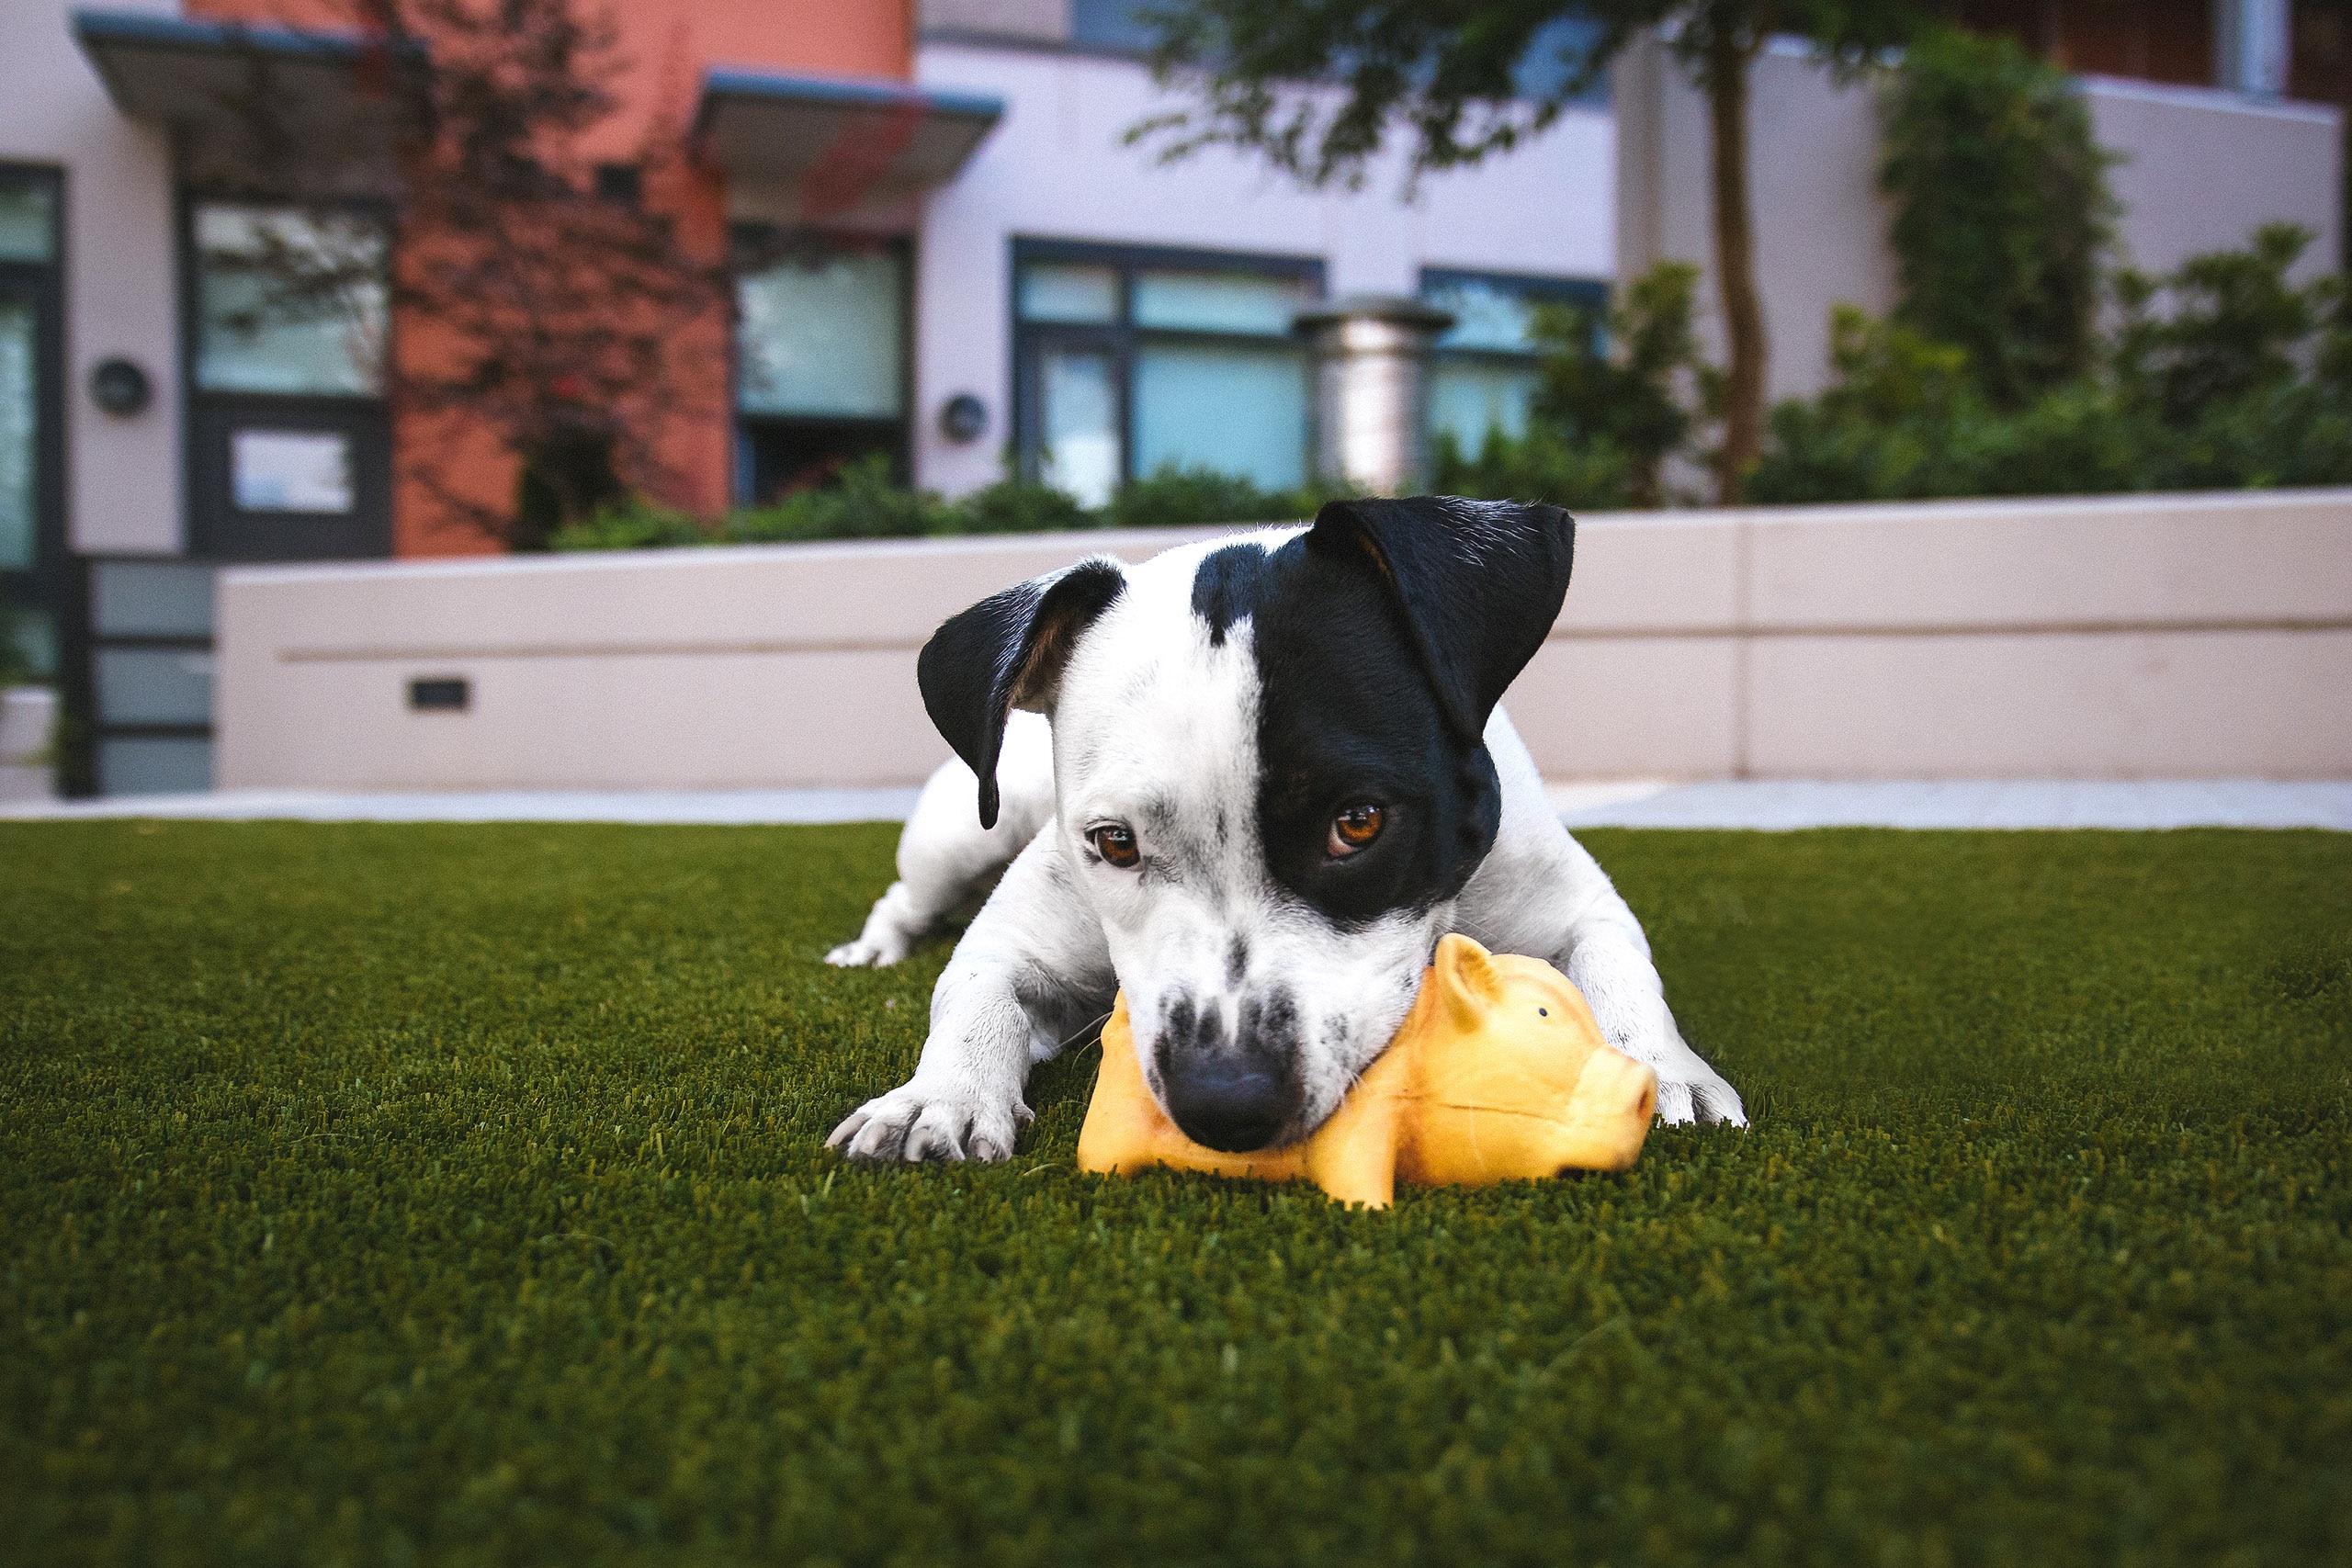 black and white short coat dog biting animal toy on green grass field near house during daytime